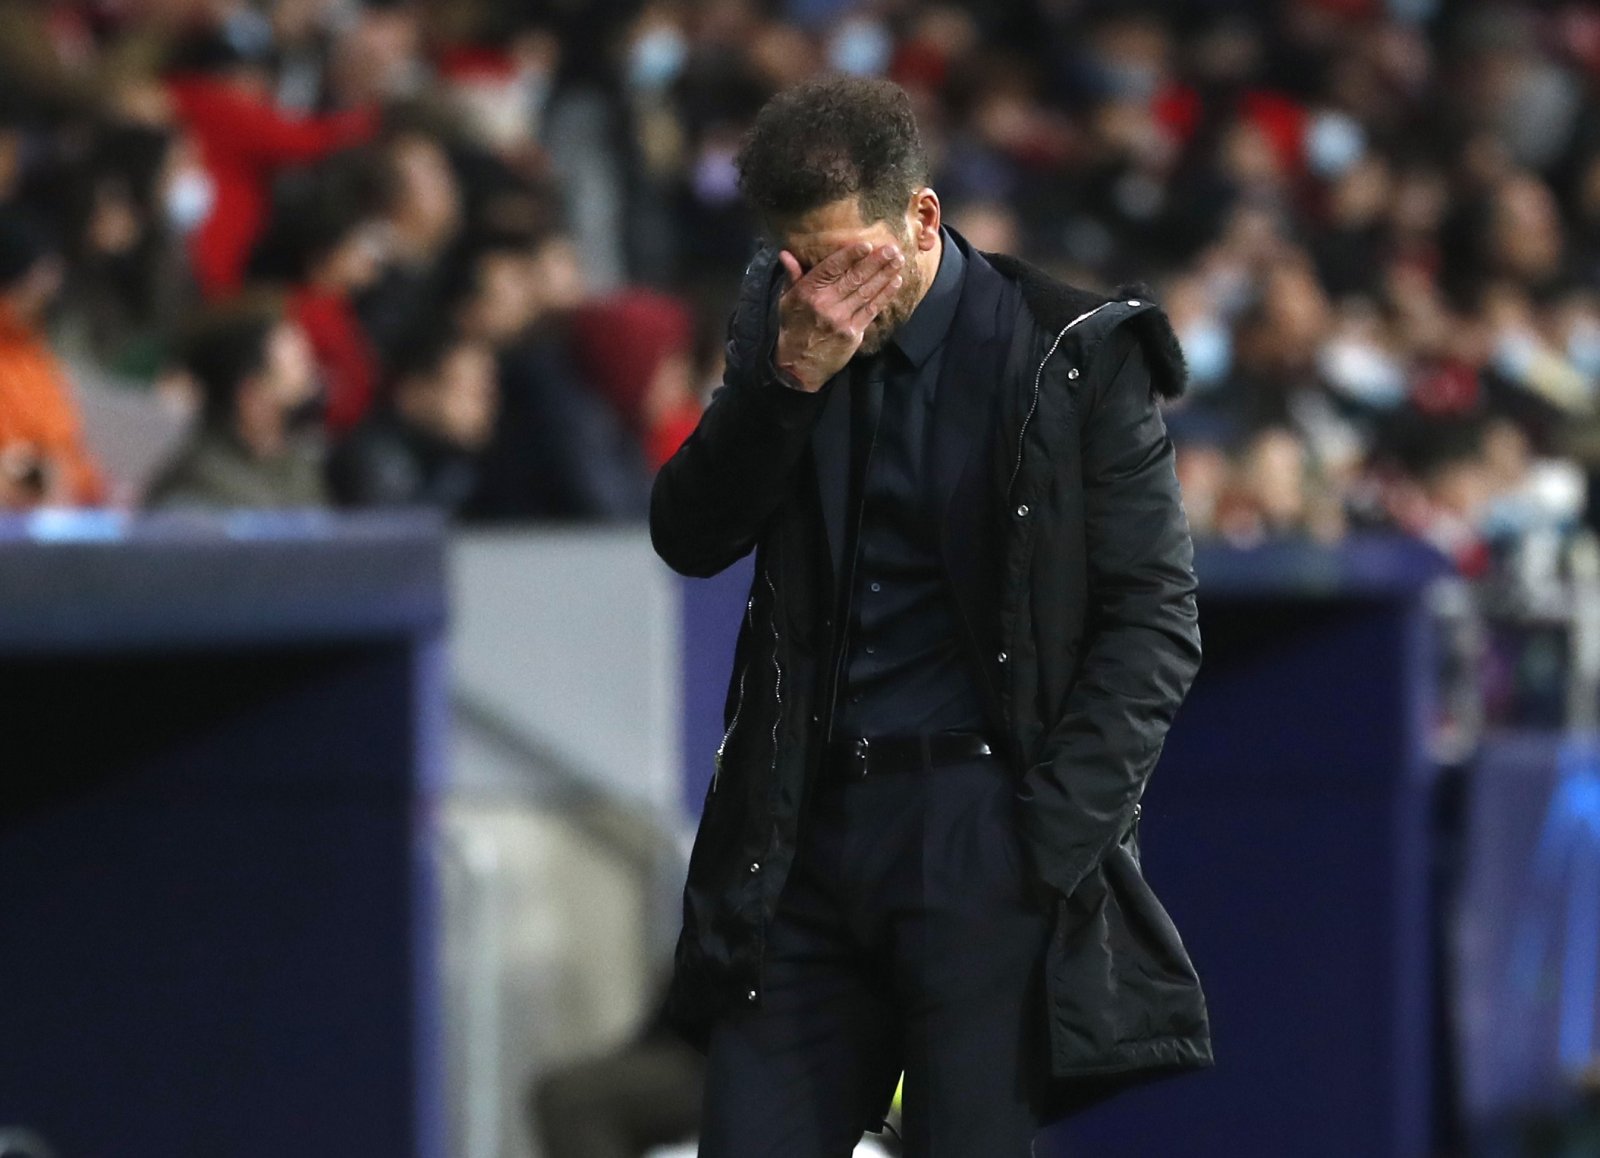 Diego Simeone: “It was a tight game that was decided by a single detail”